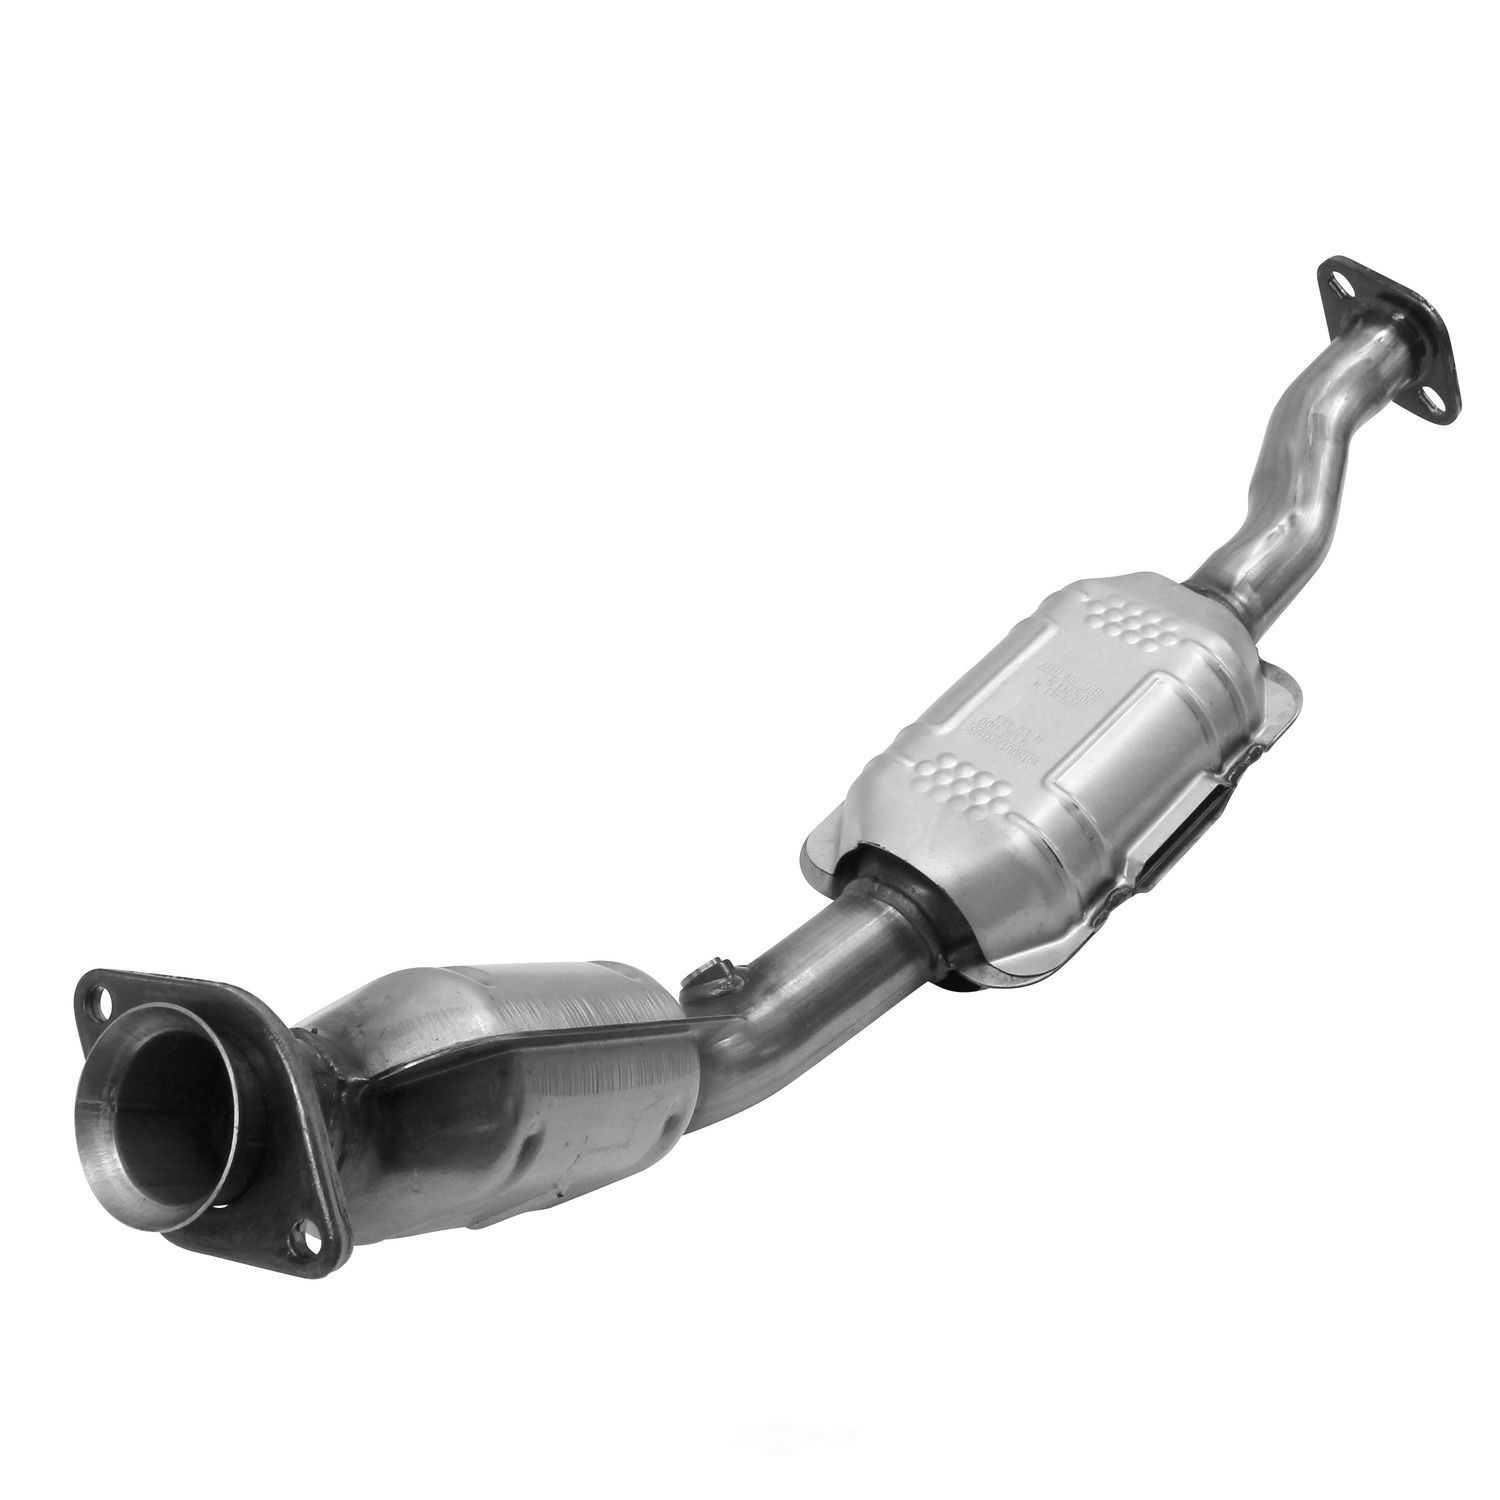 AP EXHAUST W/FEDERAL CONVERTER - Direct Fit Converter - APF 642179